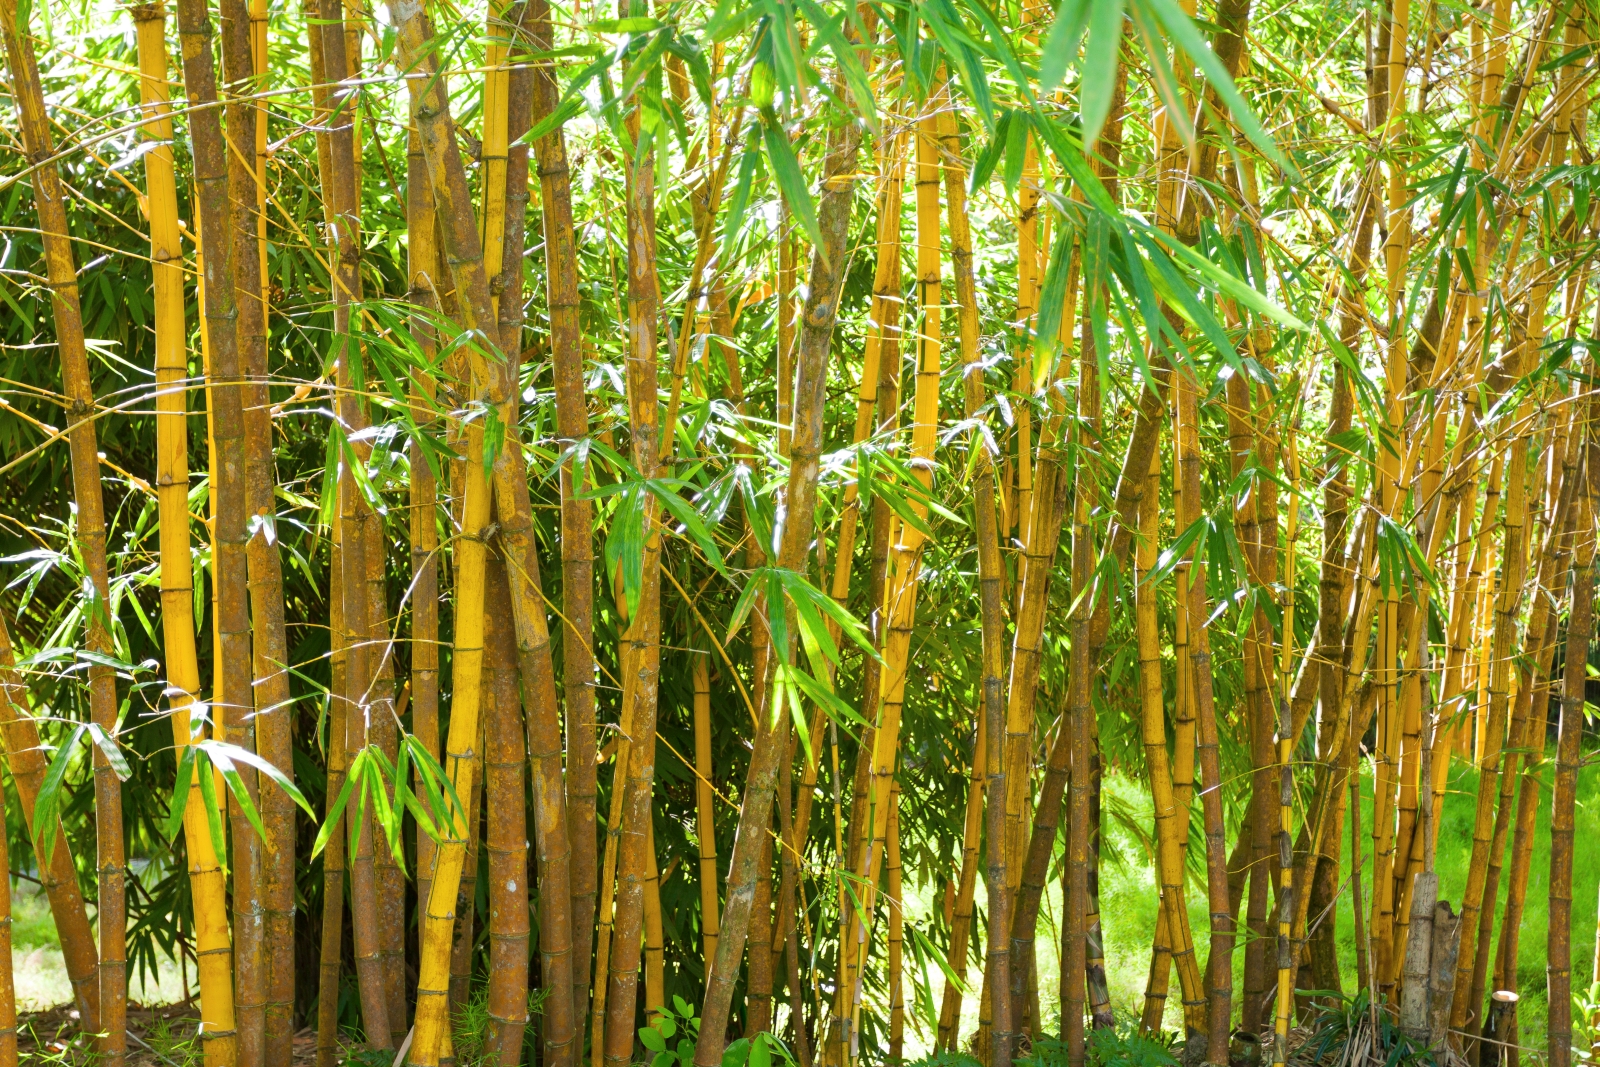 Ideal for use in building construction: Bamboo is a high-quality substitute for wood and can also be used in a very similar way.